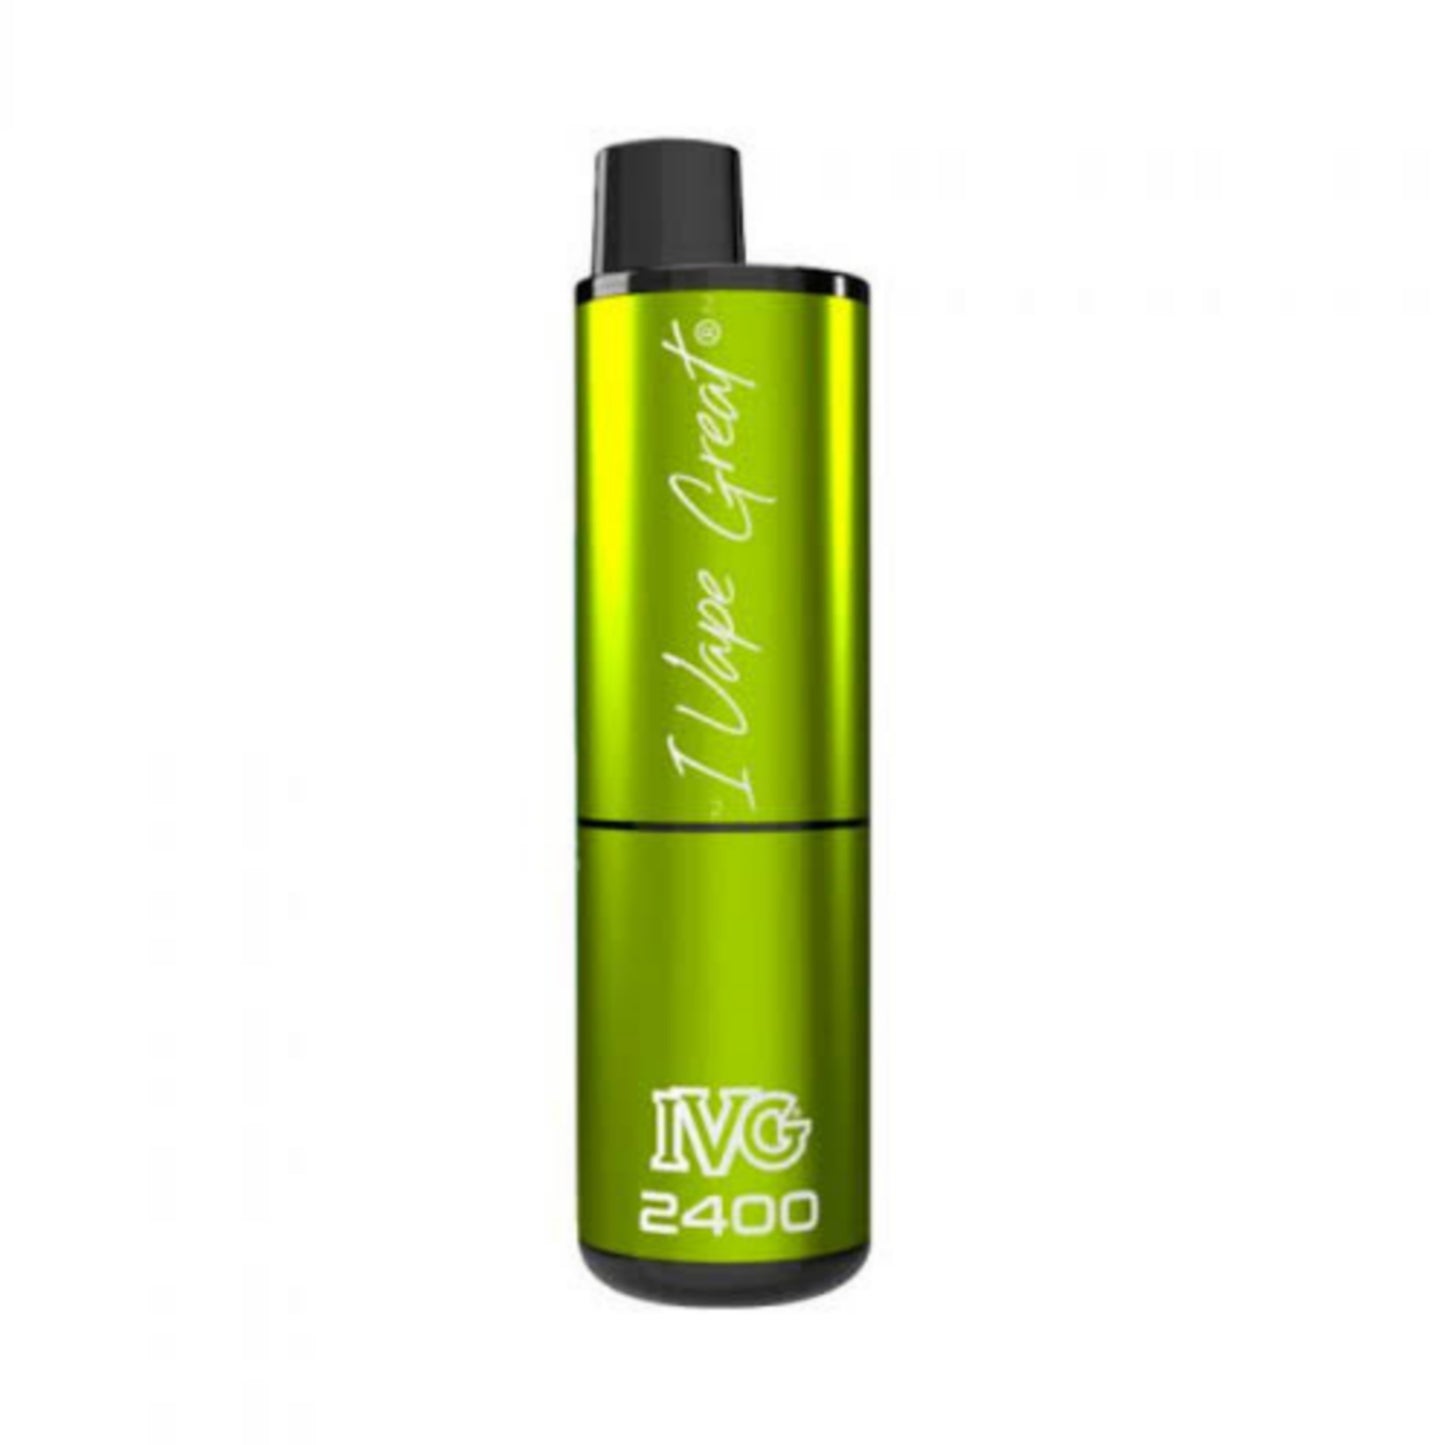 Lemon and Lime IVG 2400 | Great Deal Today